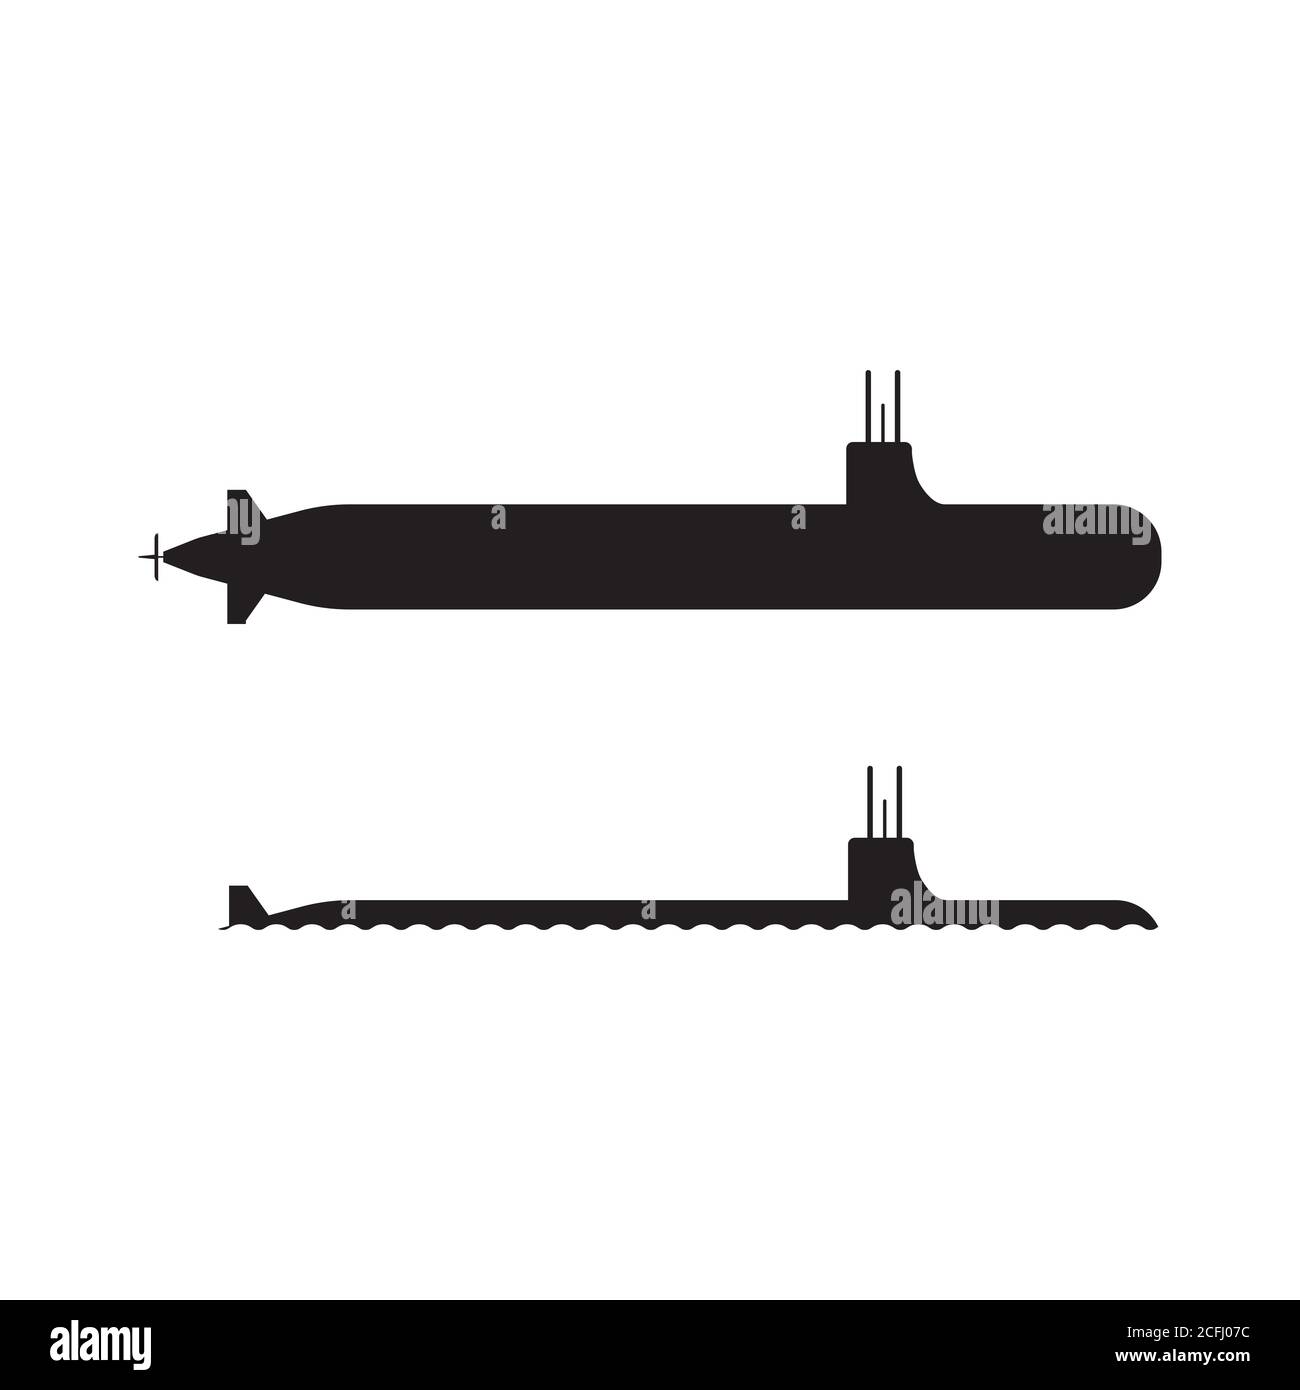 Submarine Icon. Clip Art Pictogram Depicting Whole and Underwater Military Submarine Vessel. EPS Vector Stock Vector